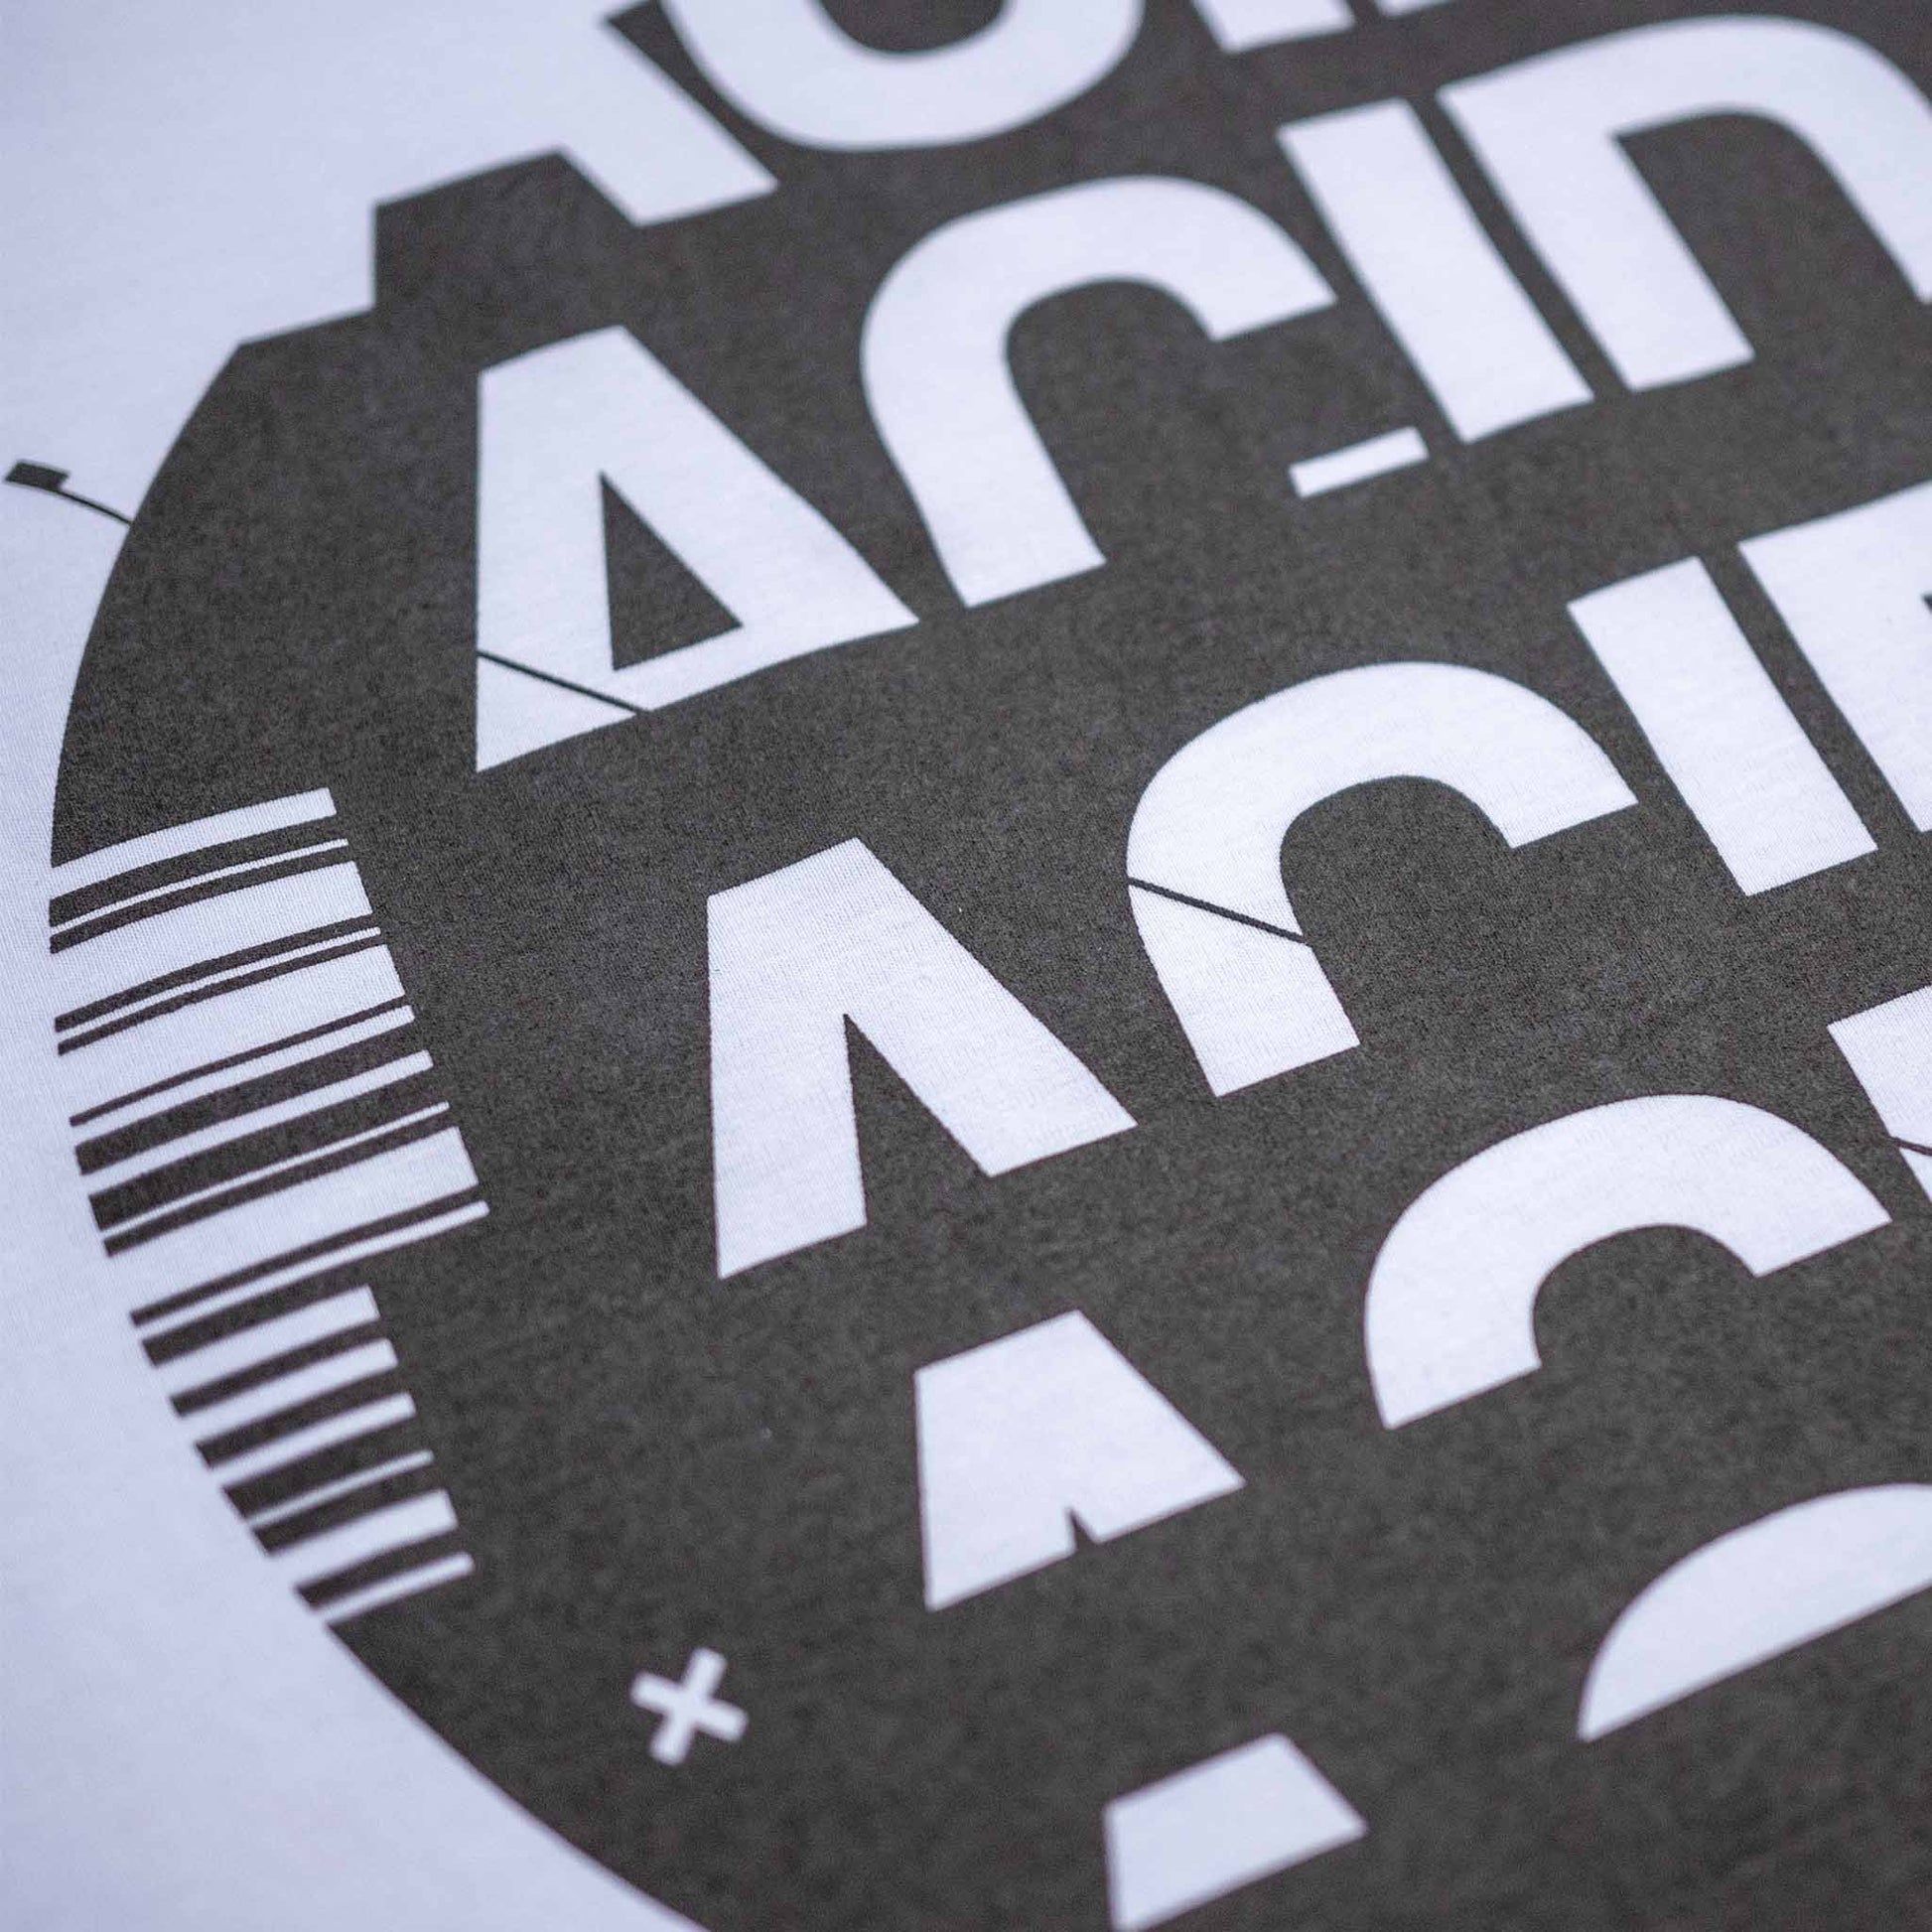 Acid typography screen-printed in graphite grey